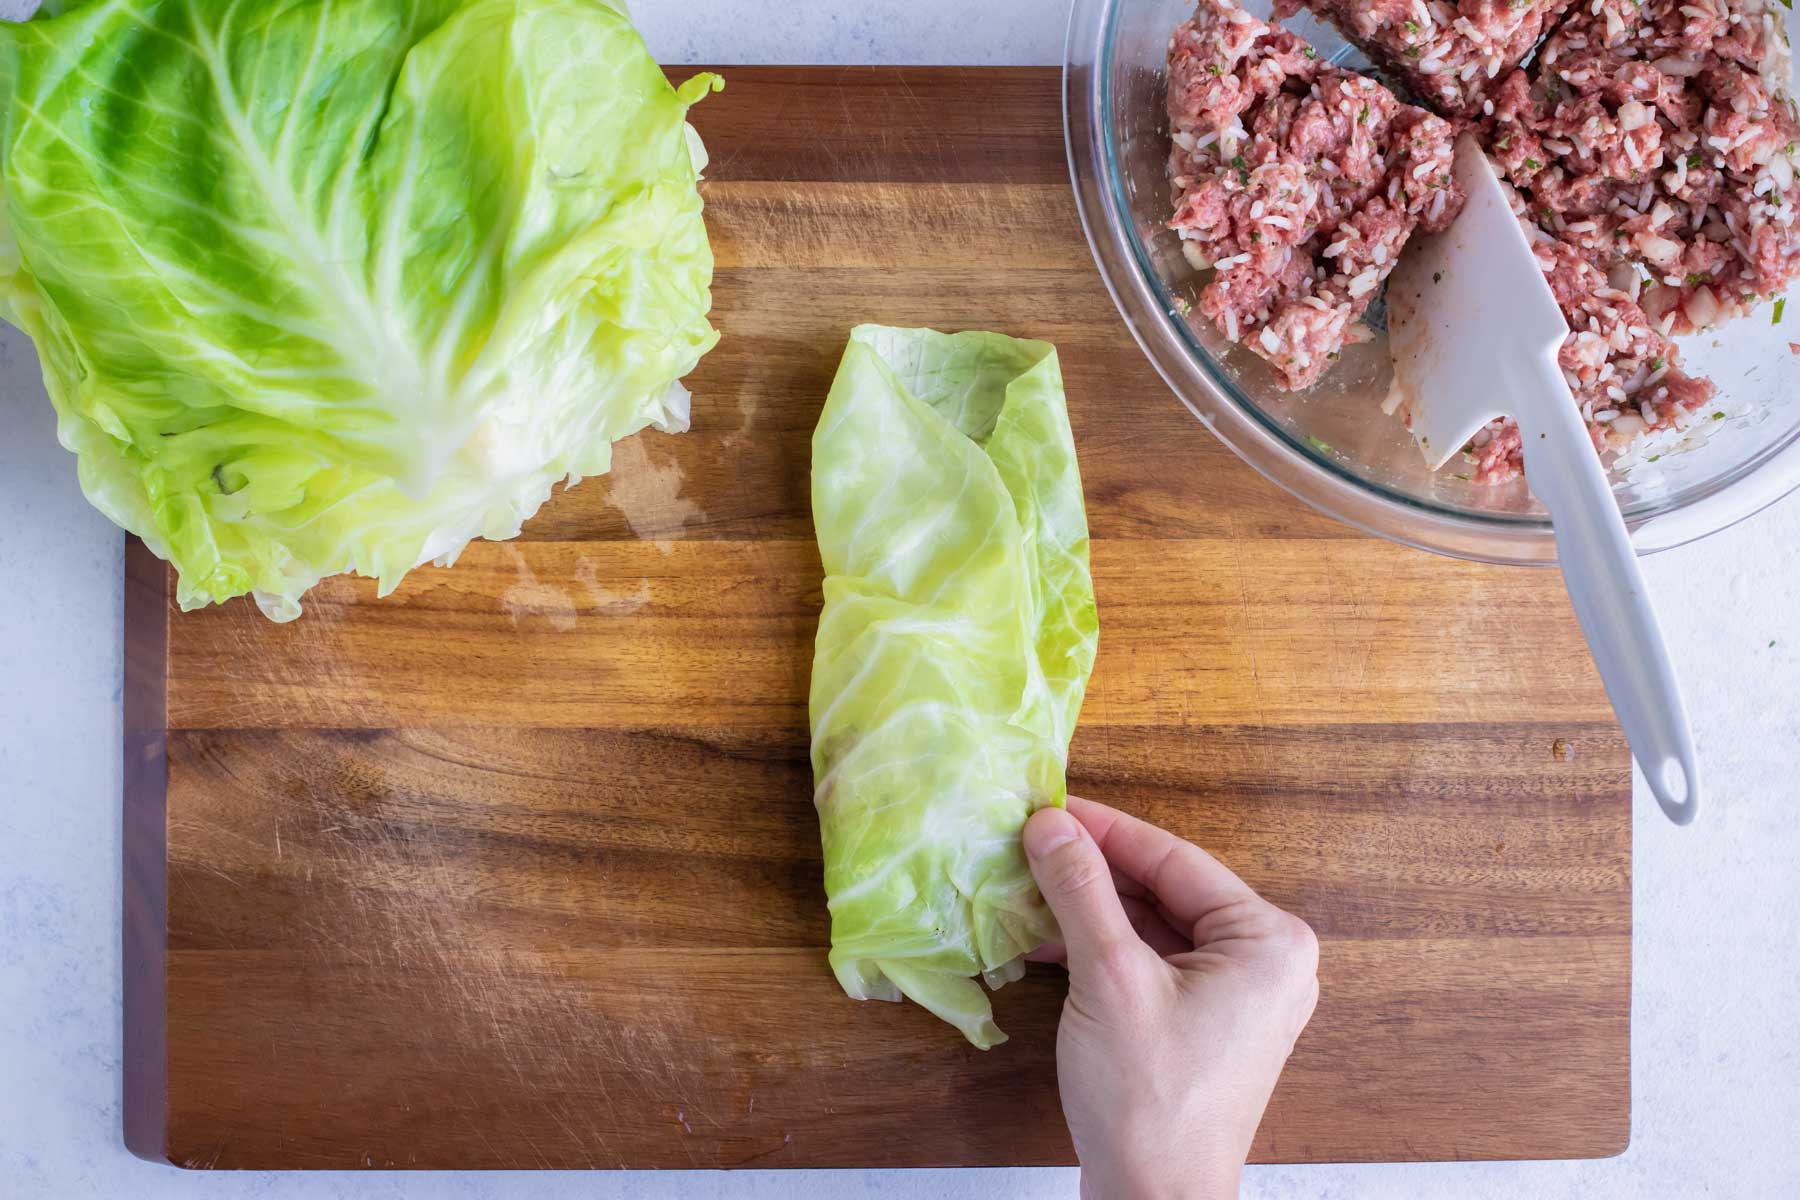 Cabbage leaf is folded into a roll.